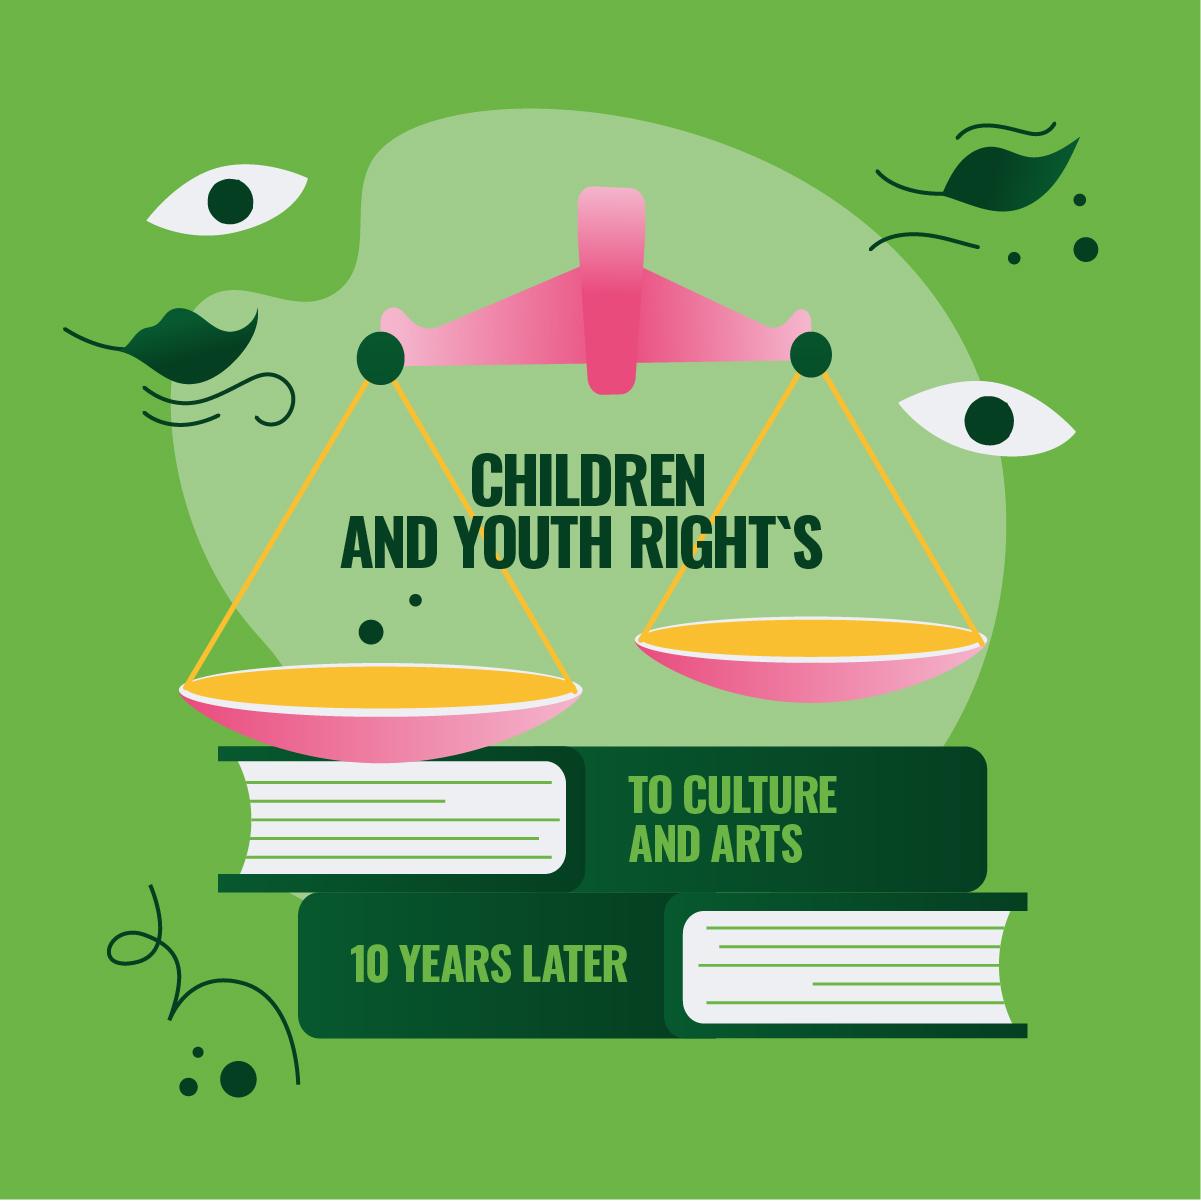 Children and Youth Rights to Culture: 10 Years Later